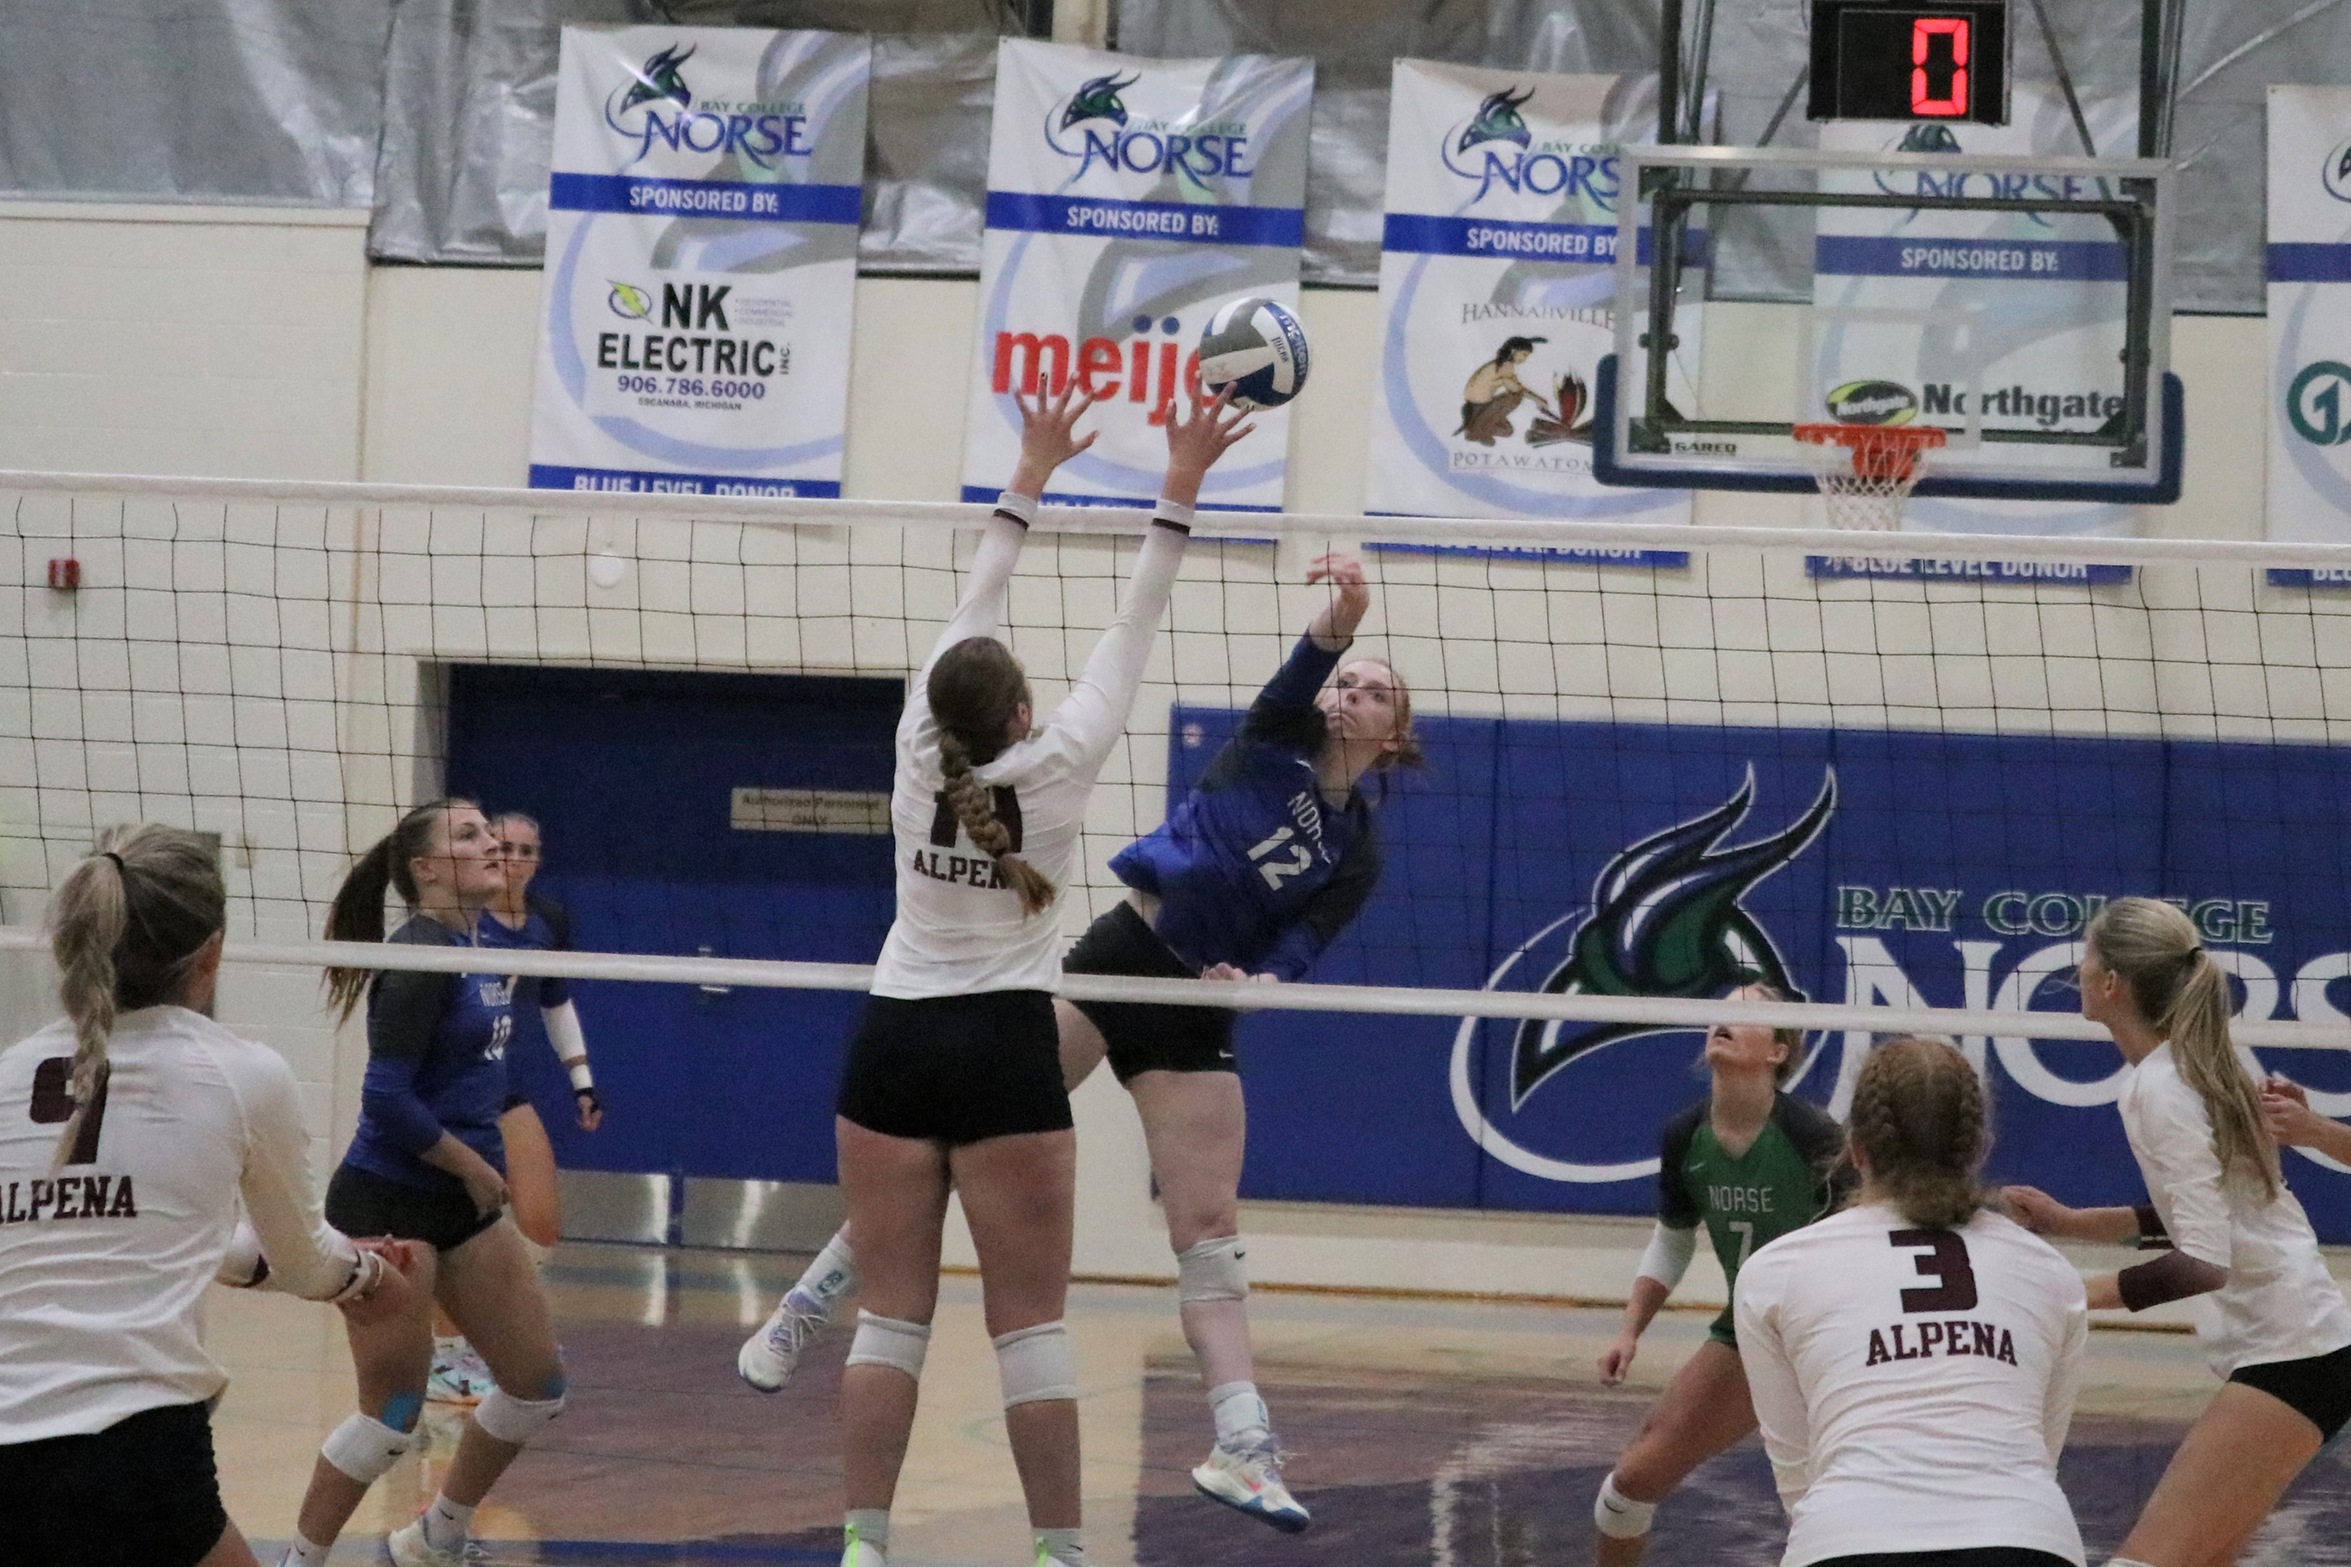 Kylee Tadisch with a kill attempt as an opposing player attempts to block it